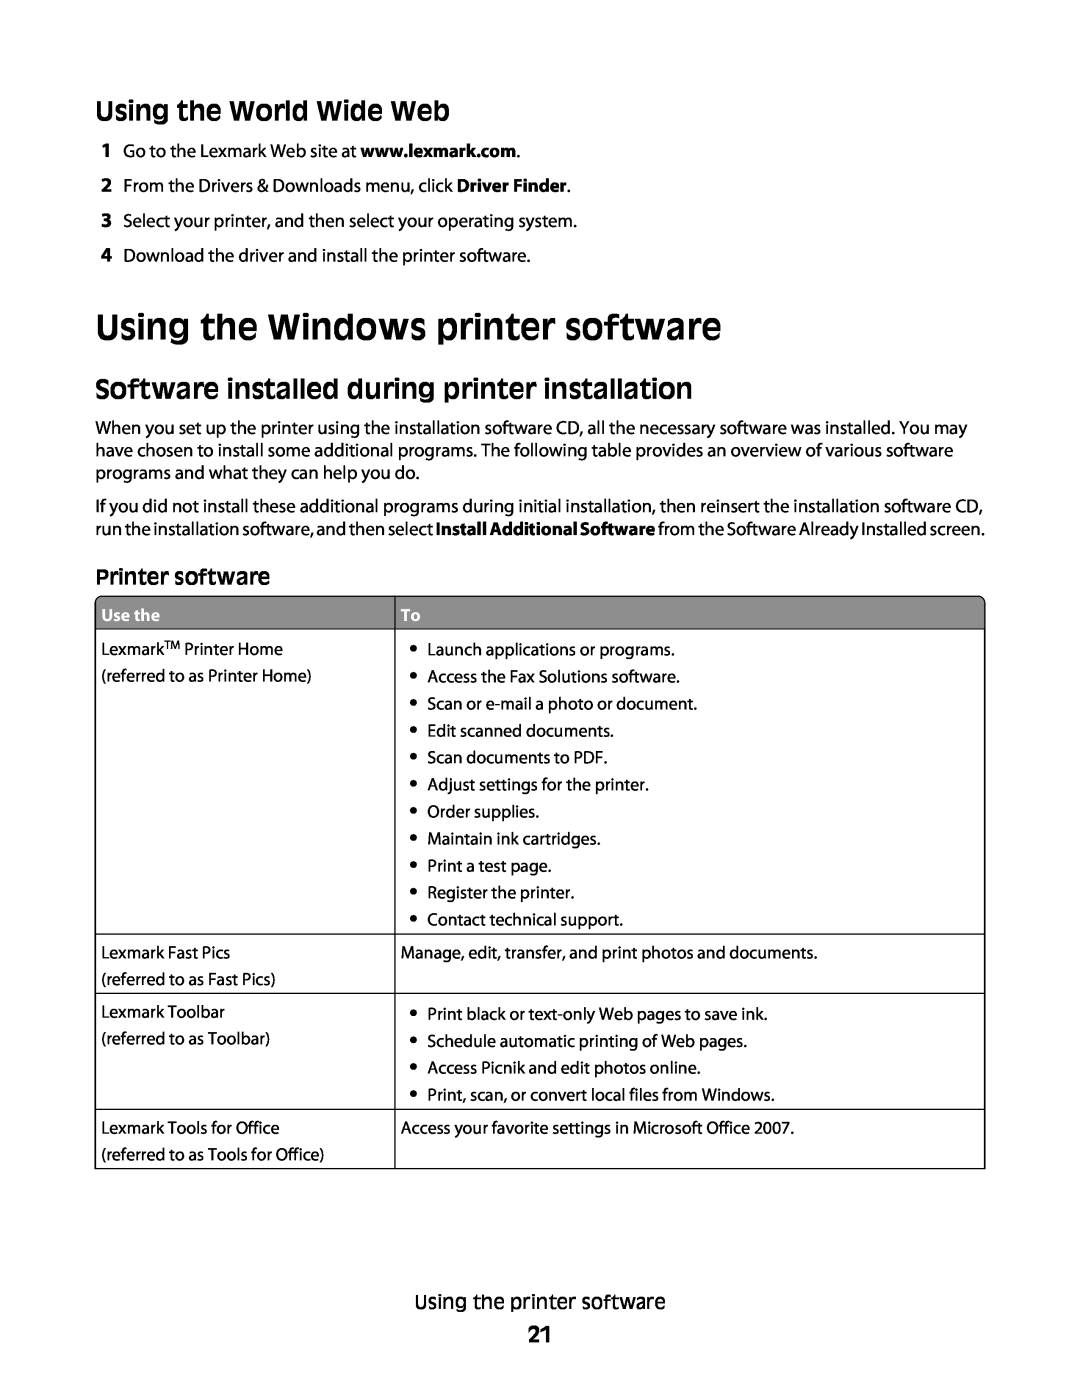 Lexmark S400 Using the Windows printer software, Using the World Wide Web, Software installed during printer installation 